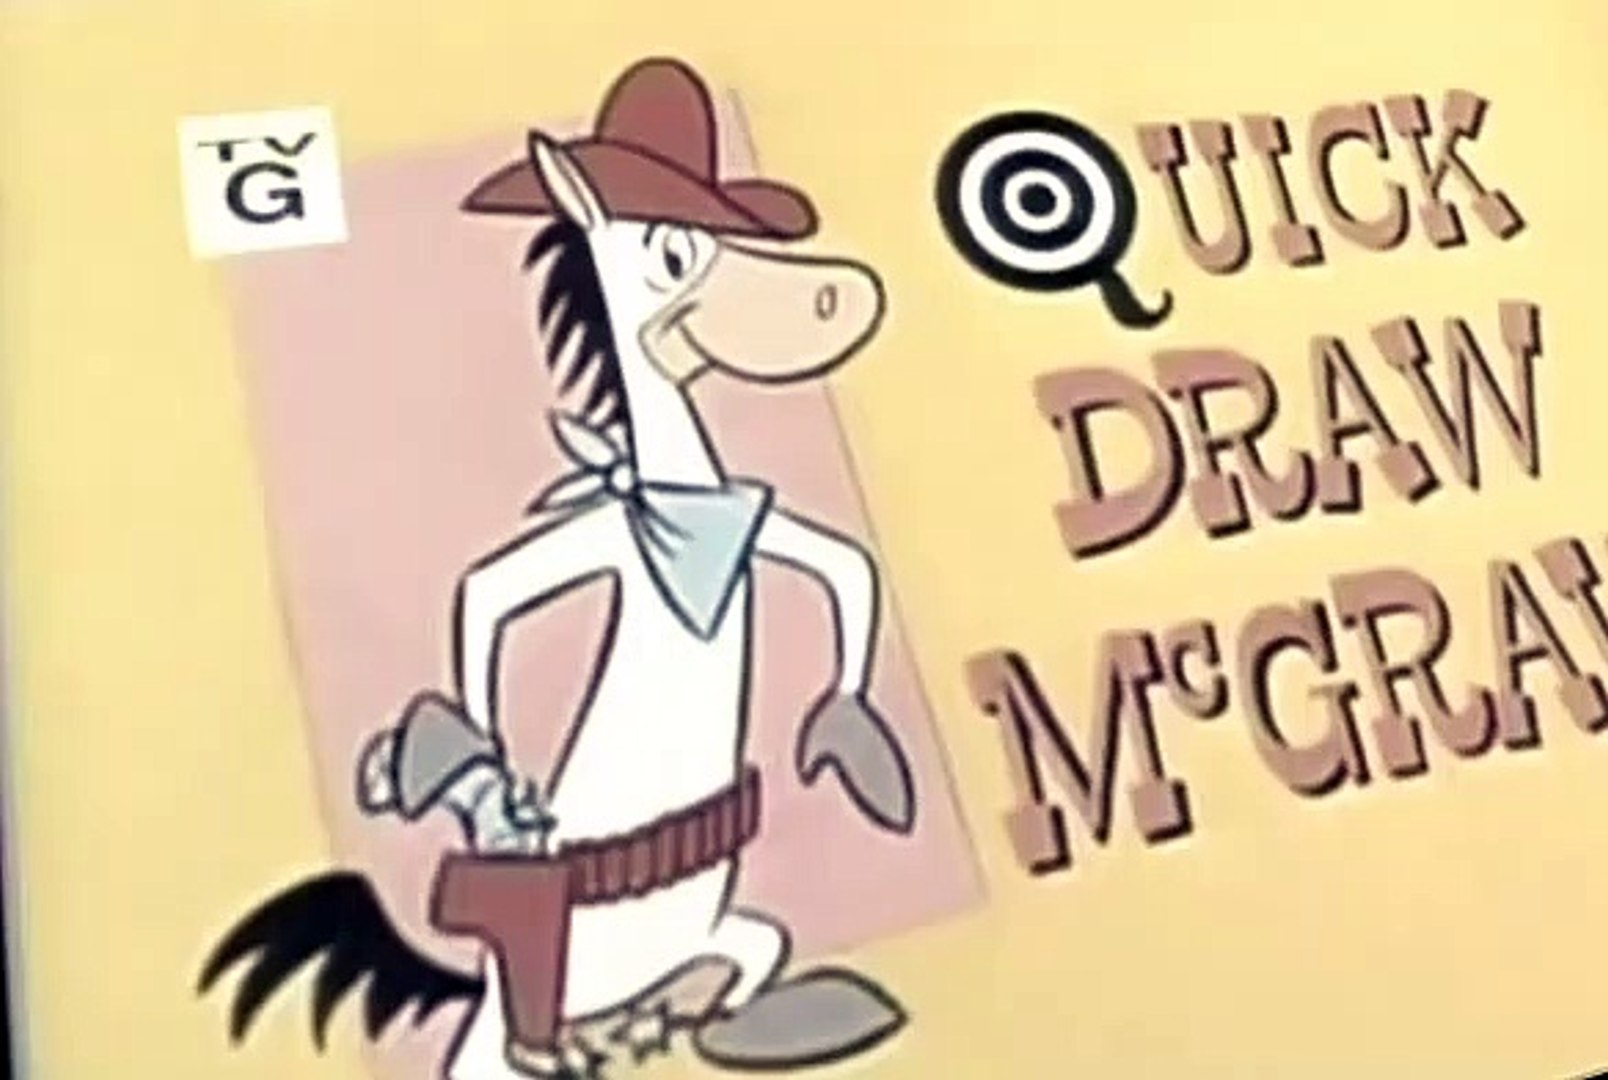 Yowp: Quick Draw McGraw — Two Too Much